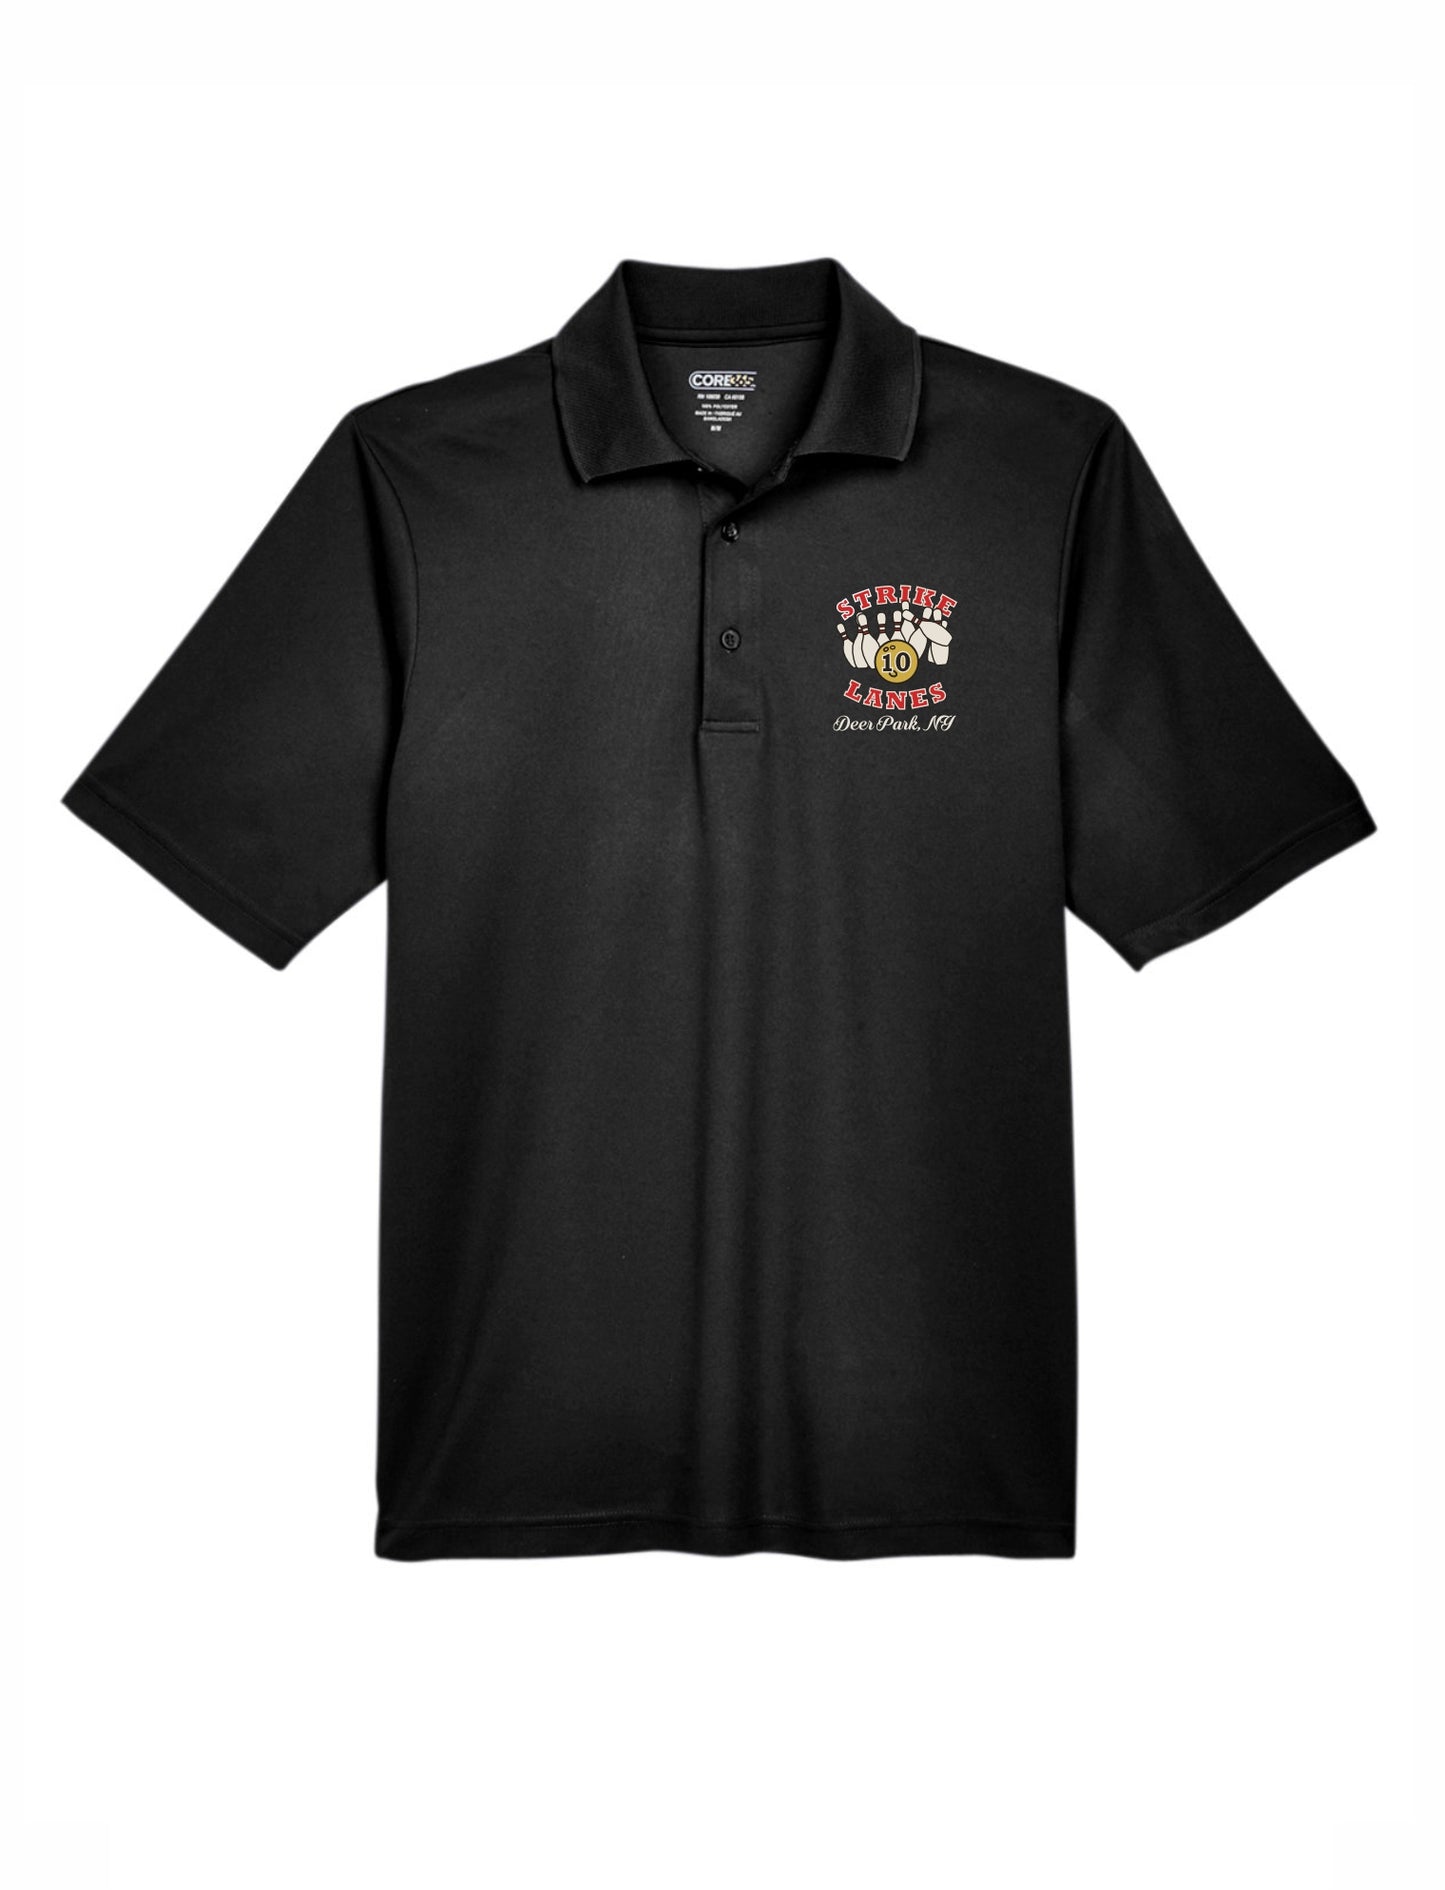 Strike 10 Lanes Embroidered Polo